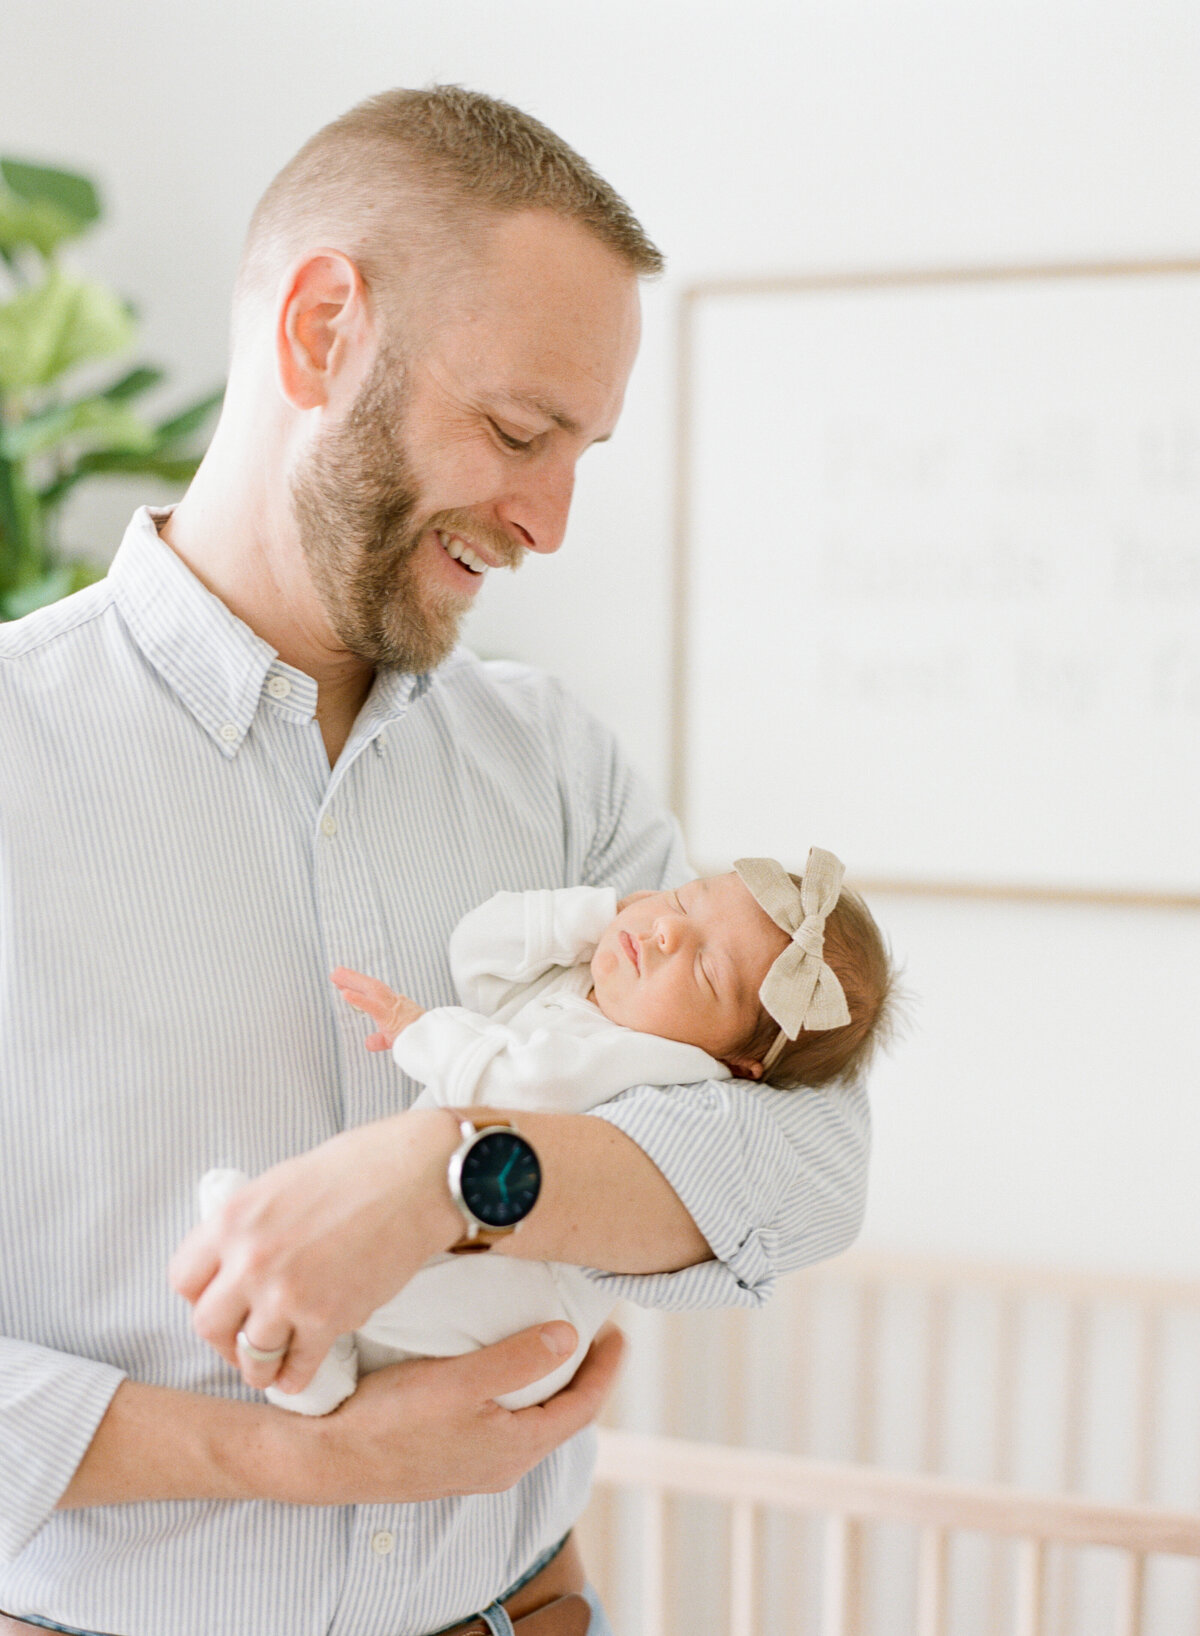 Dad holds baby in all white nursery while smiling at her lovingly during a Raleigh newborn photography session. Photographed by newborn photographer Raleigh A.J. Dunlap Photography.